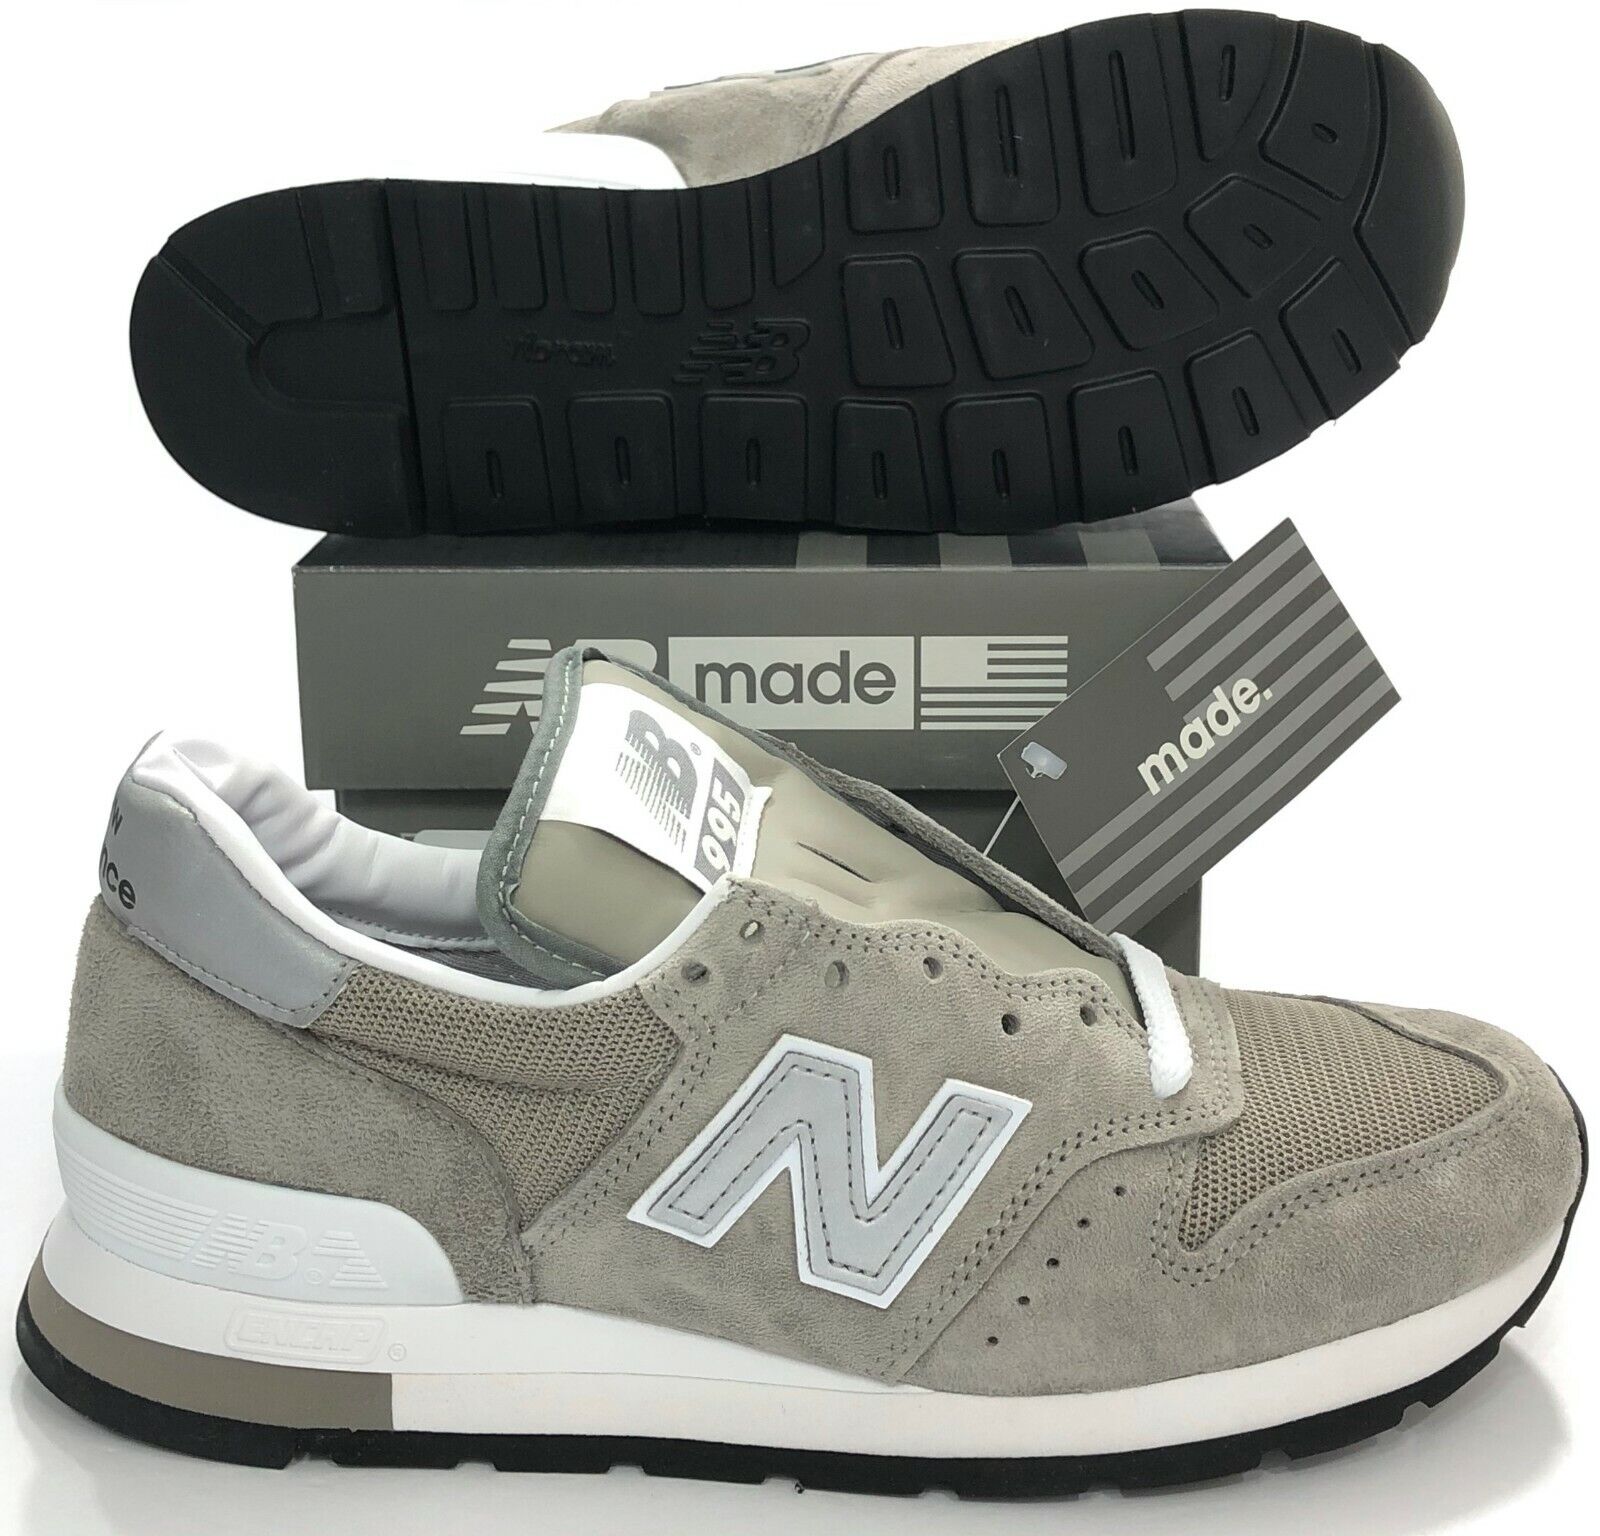 New Balance 995 Made in USA Gray White Silver Shoes M995GR Men's 6 (Women 7.5) - Shopping.com